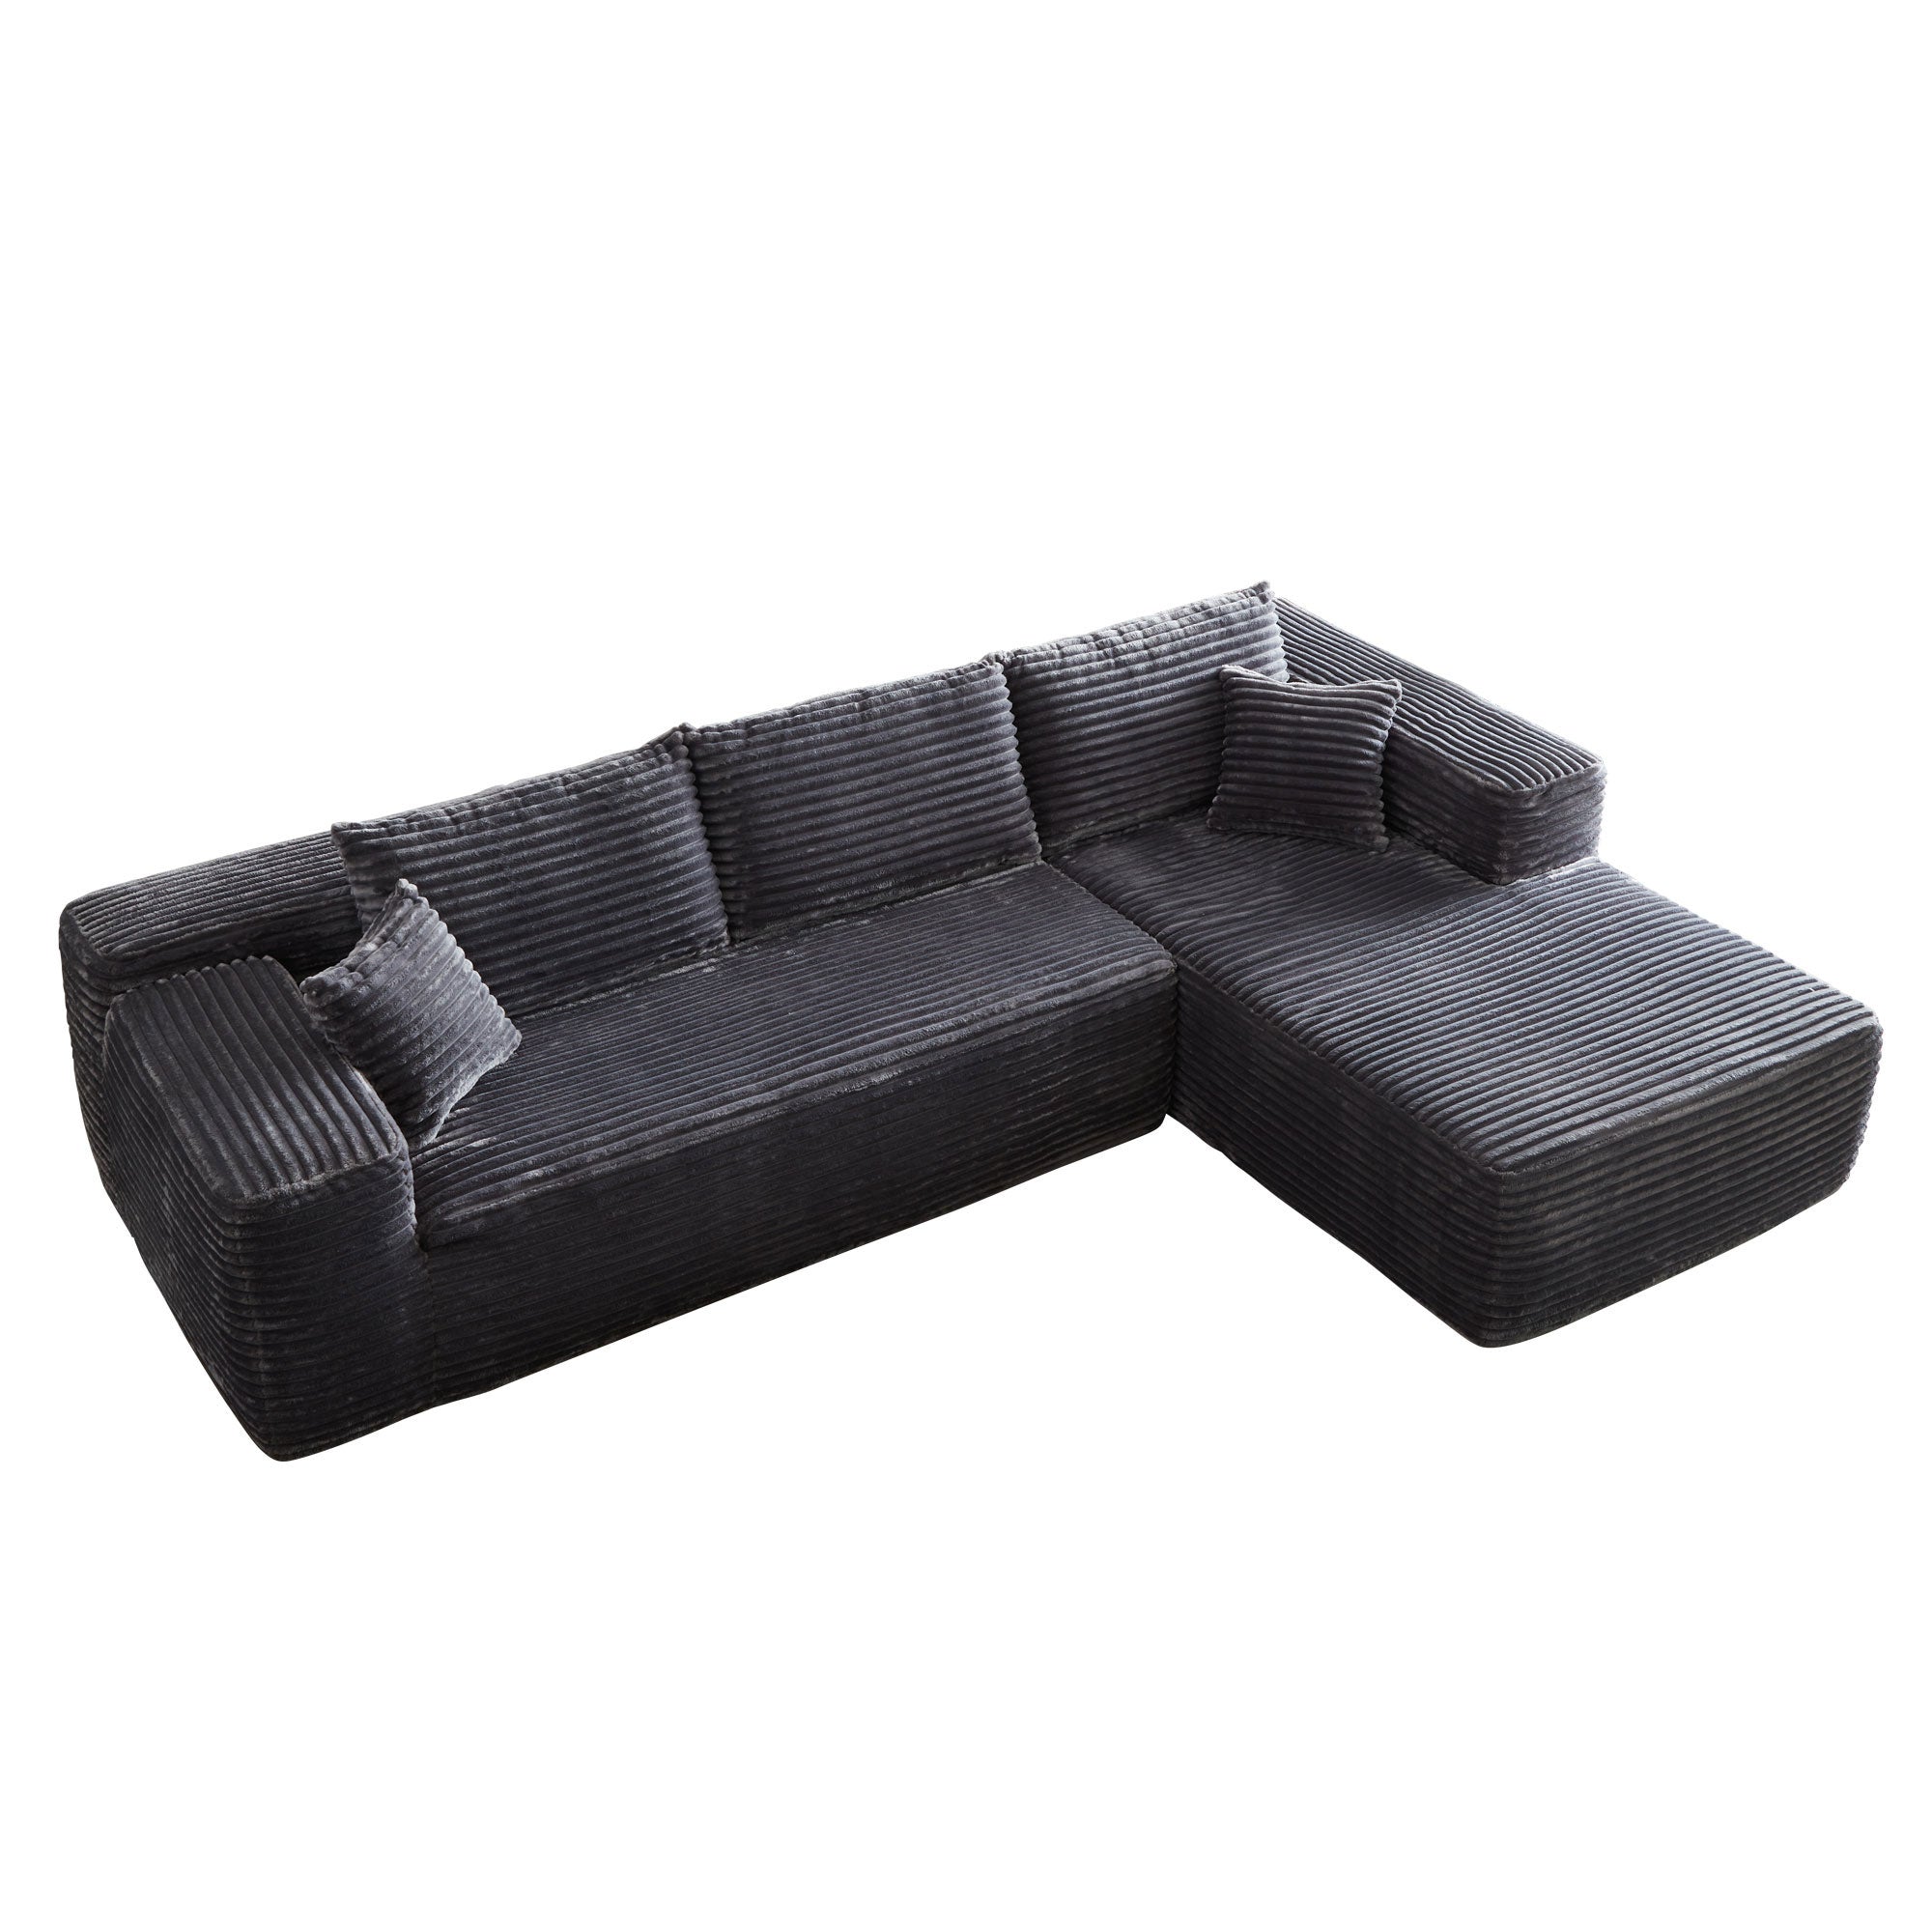 Ovios 104" L-Shape Modular Couch with Chaise, Plush Corduroy Fabric, No Assembly Required